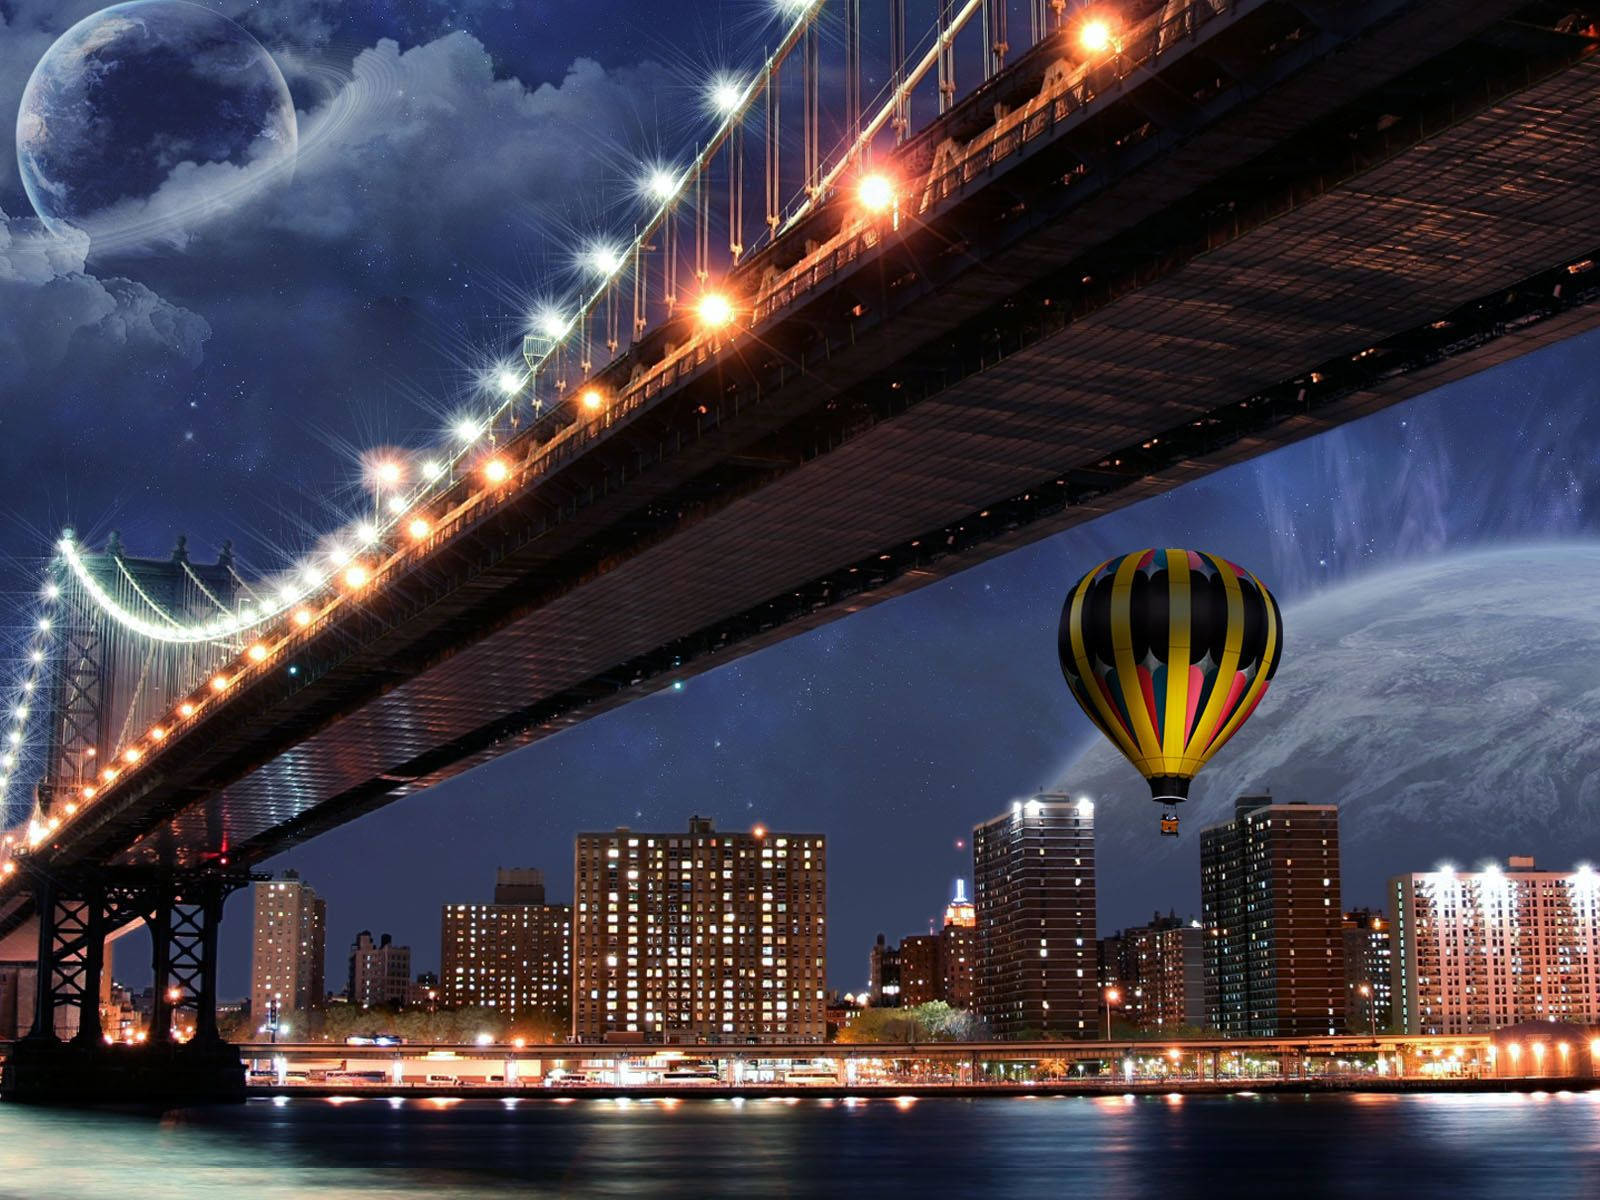 3D bridge filled with lights with hot air balloon wallpaper.